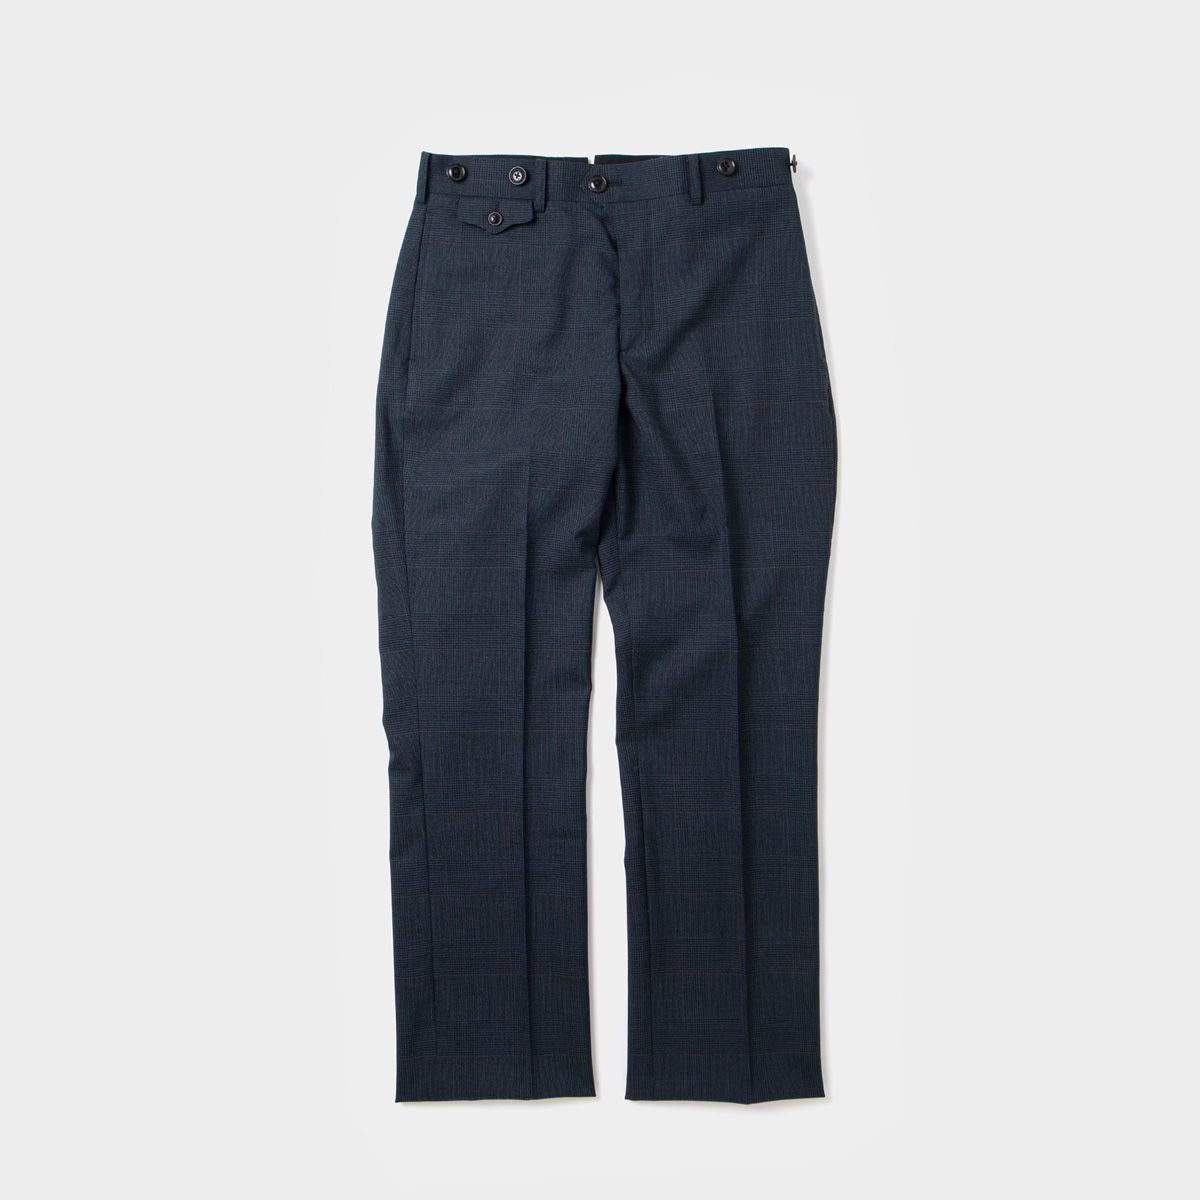 Glen Check Trousers【OR-1049B】